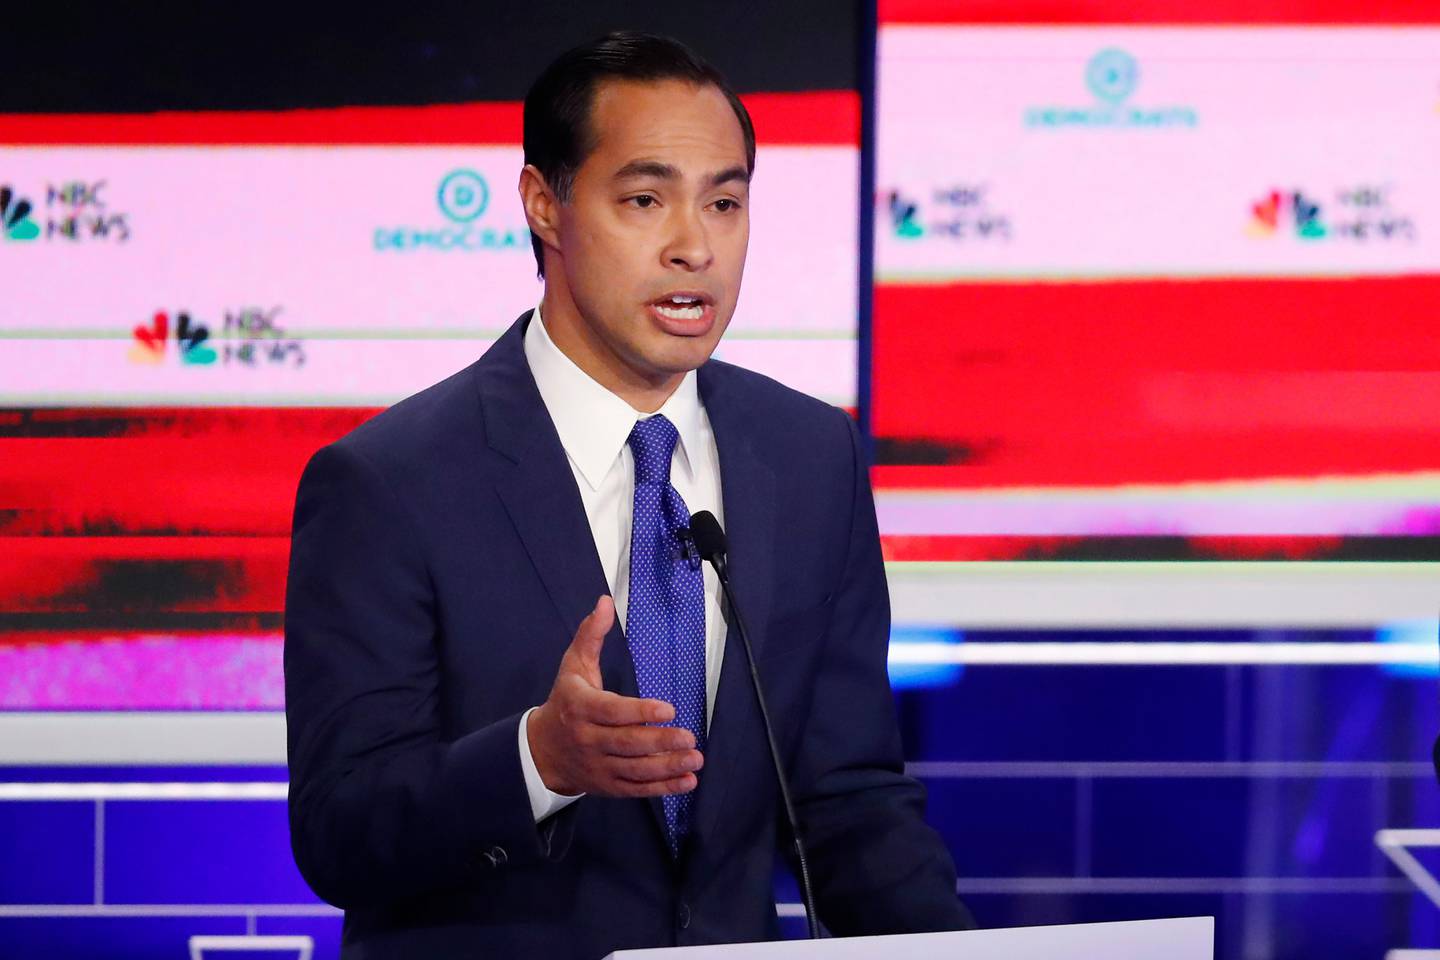 Democratic presidential candidate former Housing and Urban Development Secretary Julian Castro gestures during a Democratic primary debate hosted by NBC News at the Adrienne Arsht Center for the Performing Arts, Wednesday, June 26, 2019, in Miami. (AP Photo/Wilfredo Lee)